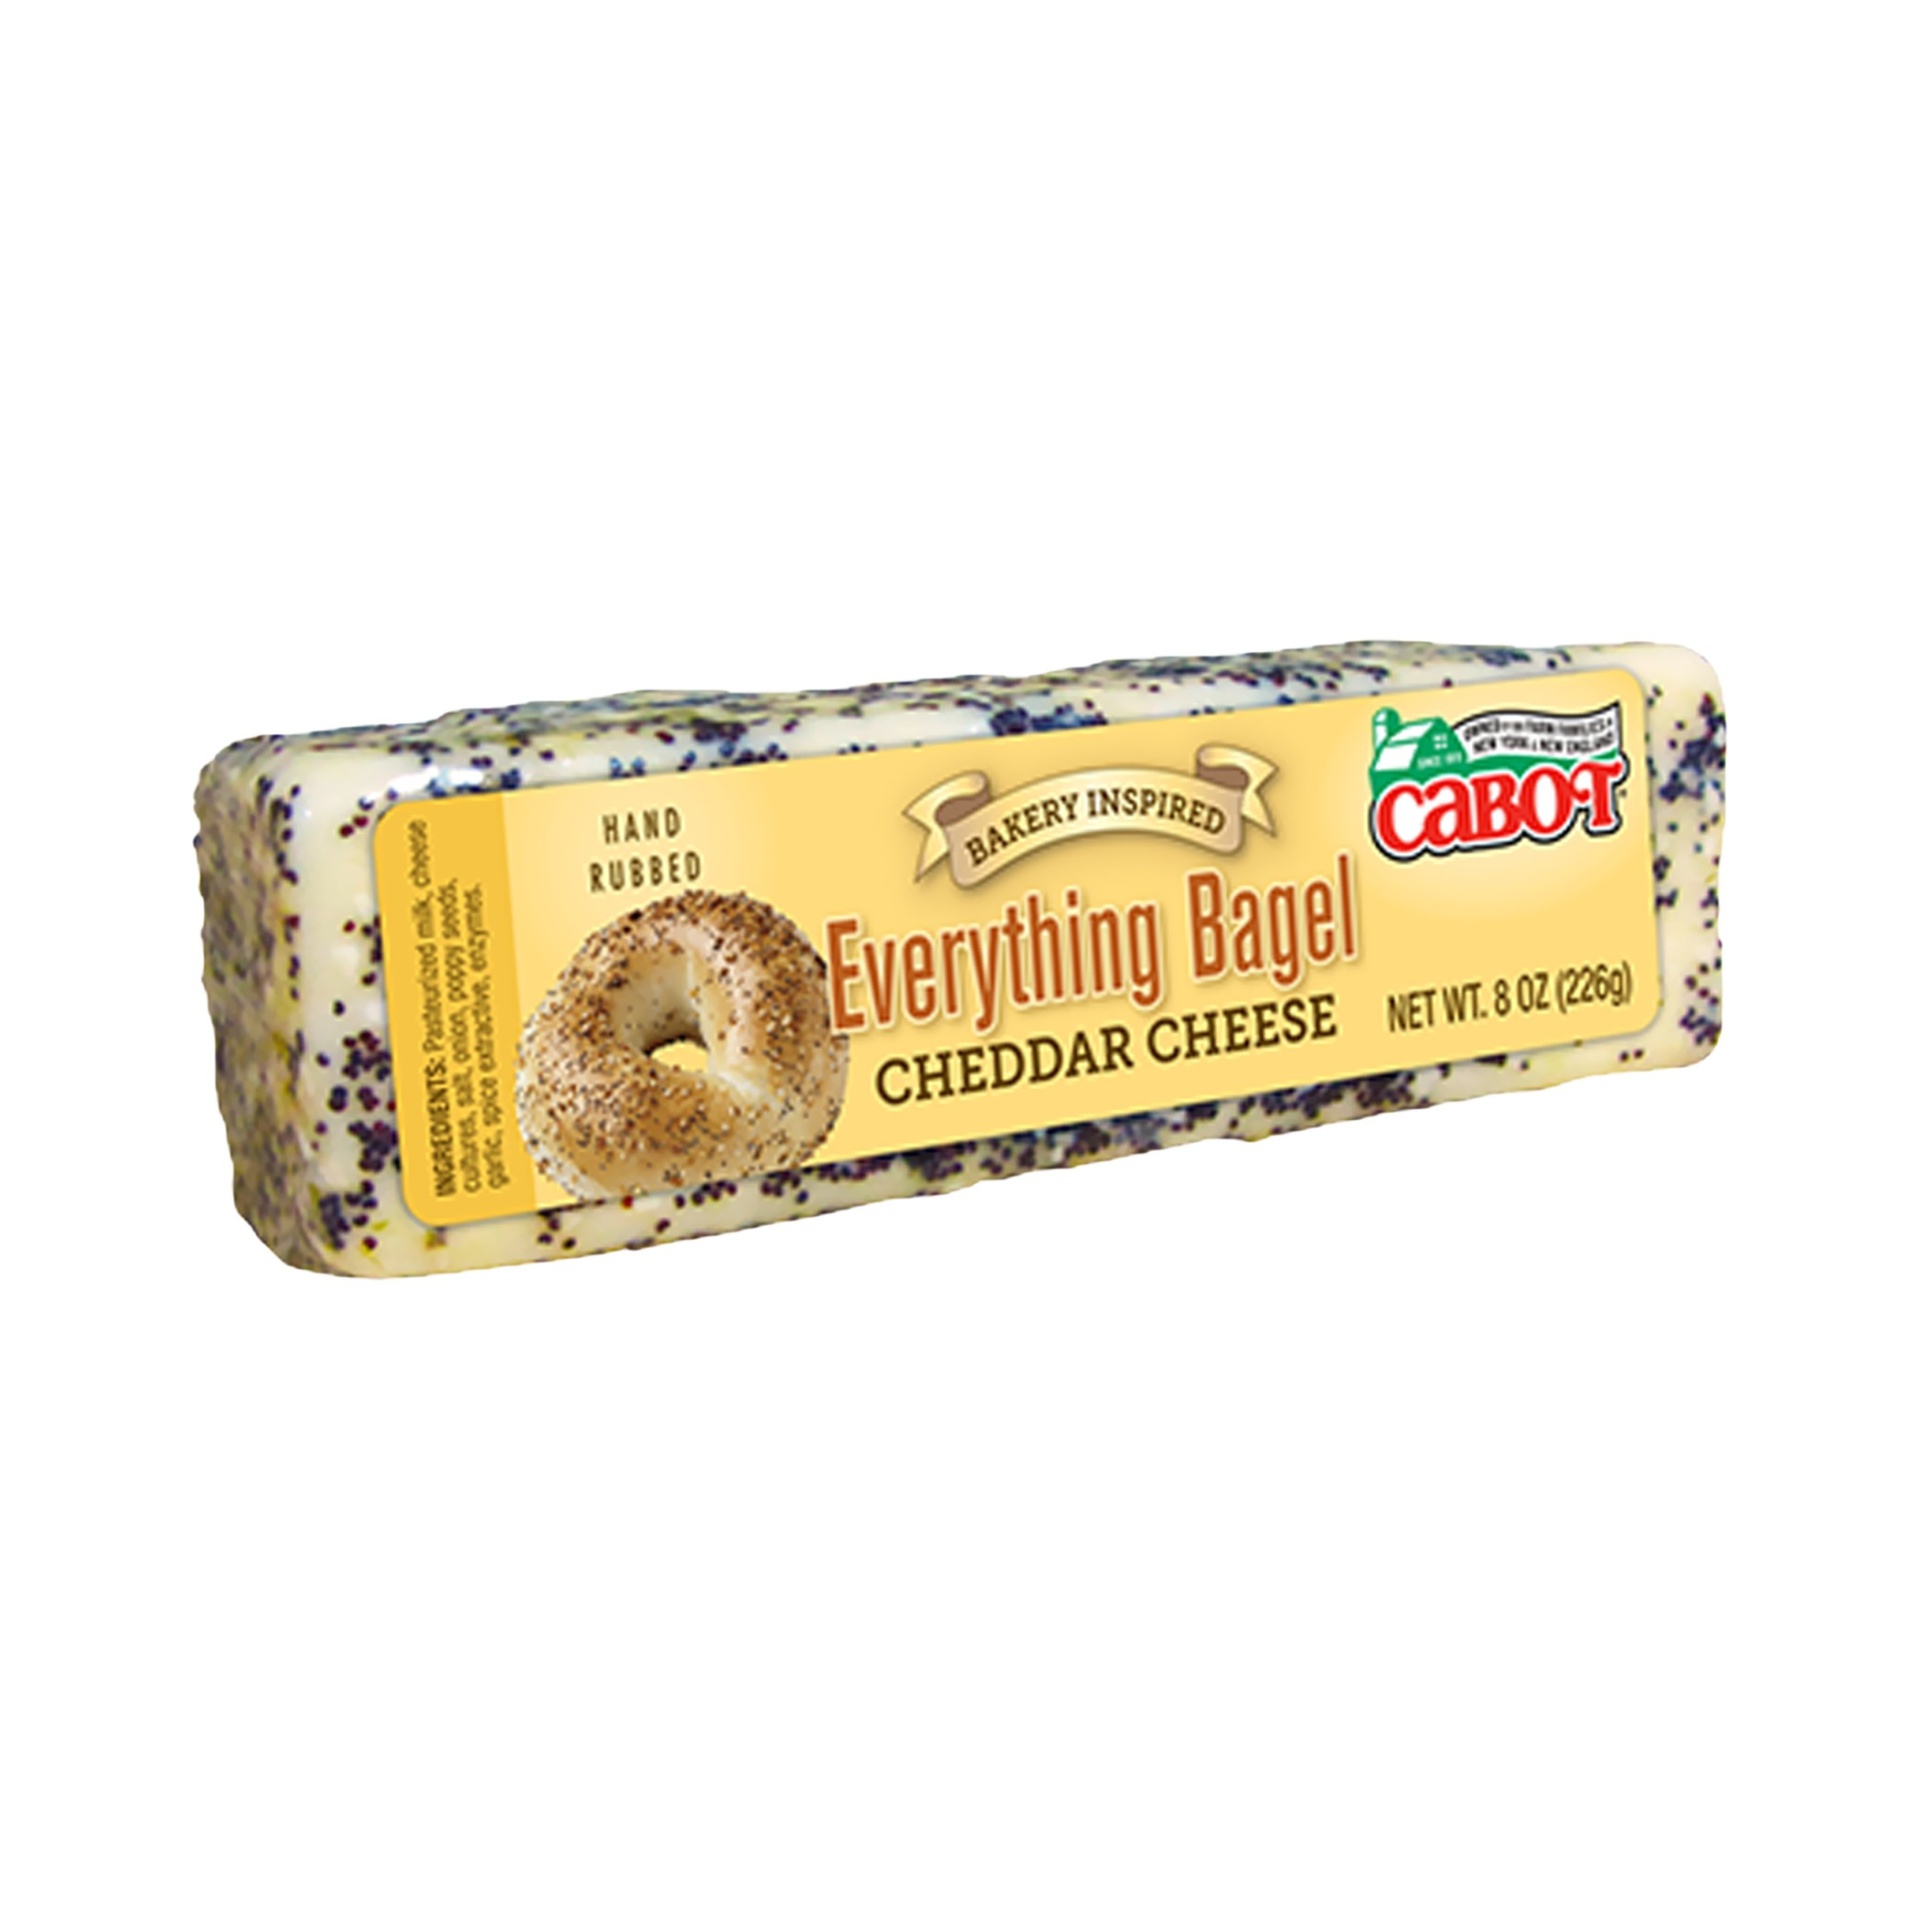 slide 1 of 1, Cabot Cheddar Cheese Everything Bagel, 8 oz